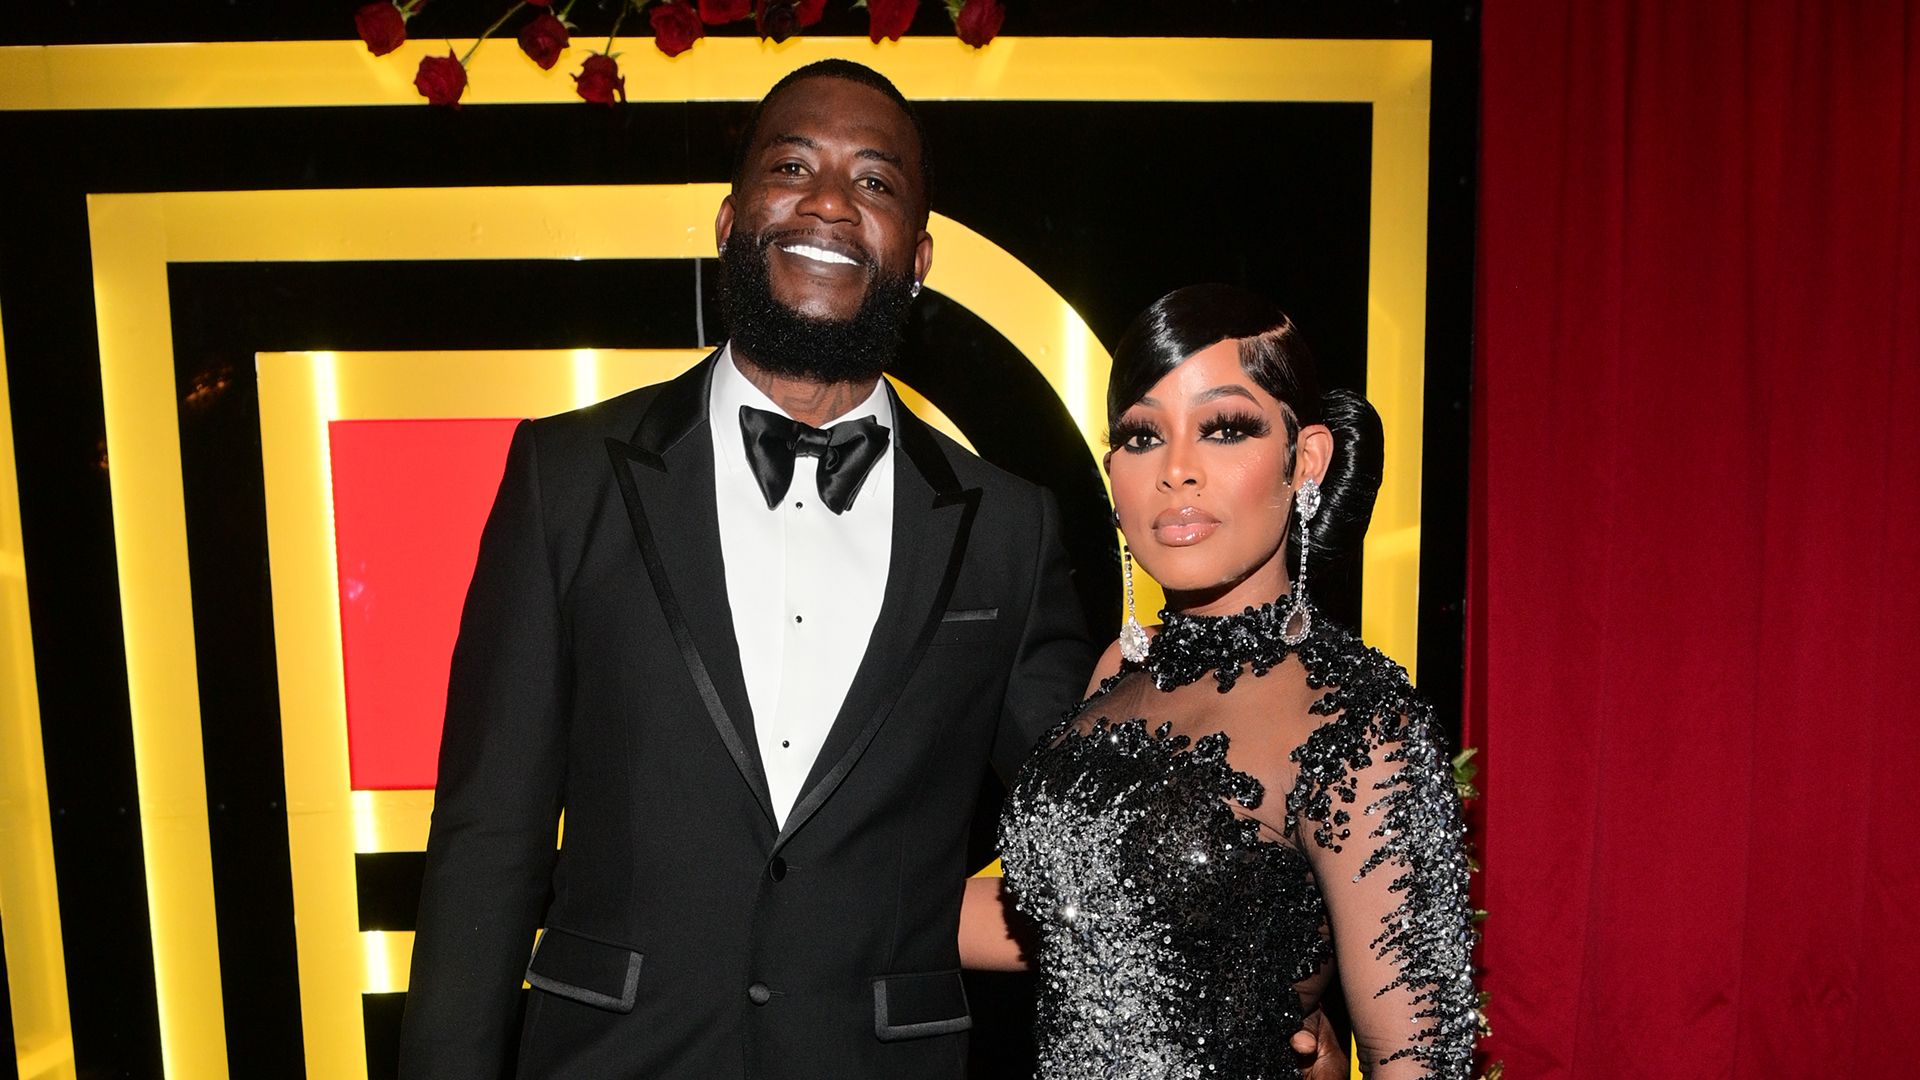 Gucci Mane and Wife Keyshia Ka'oir Are Expecting Their First Child Together